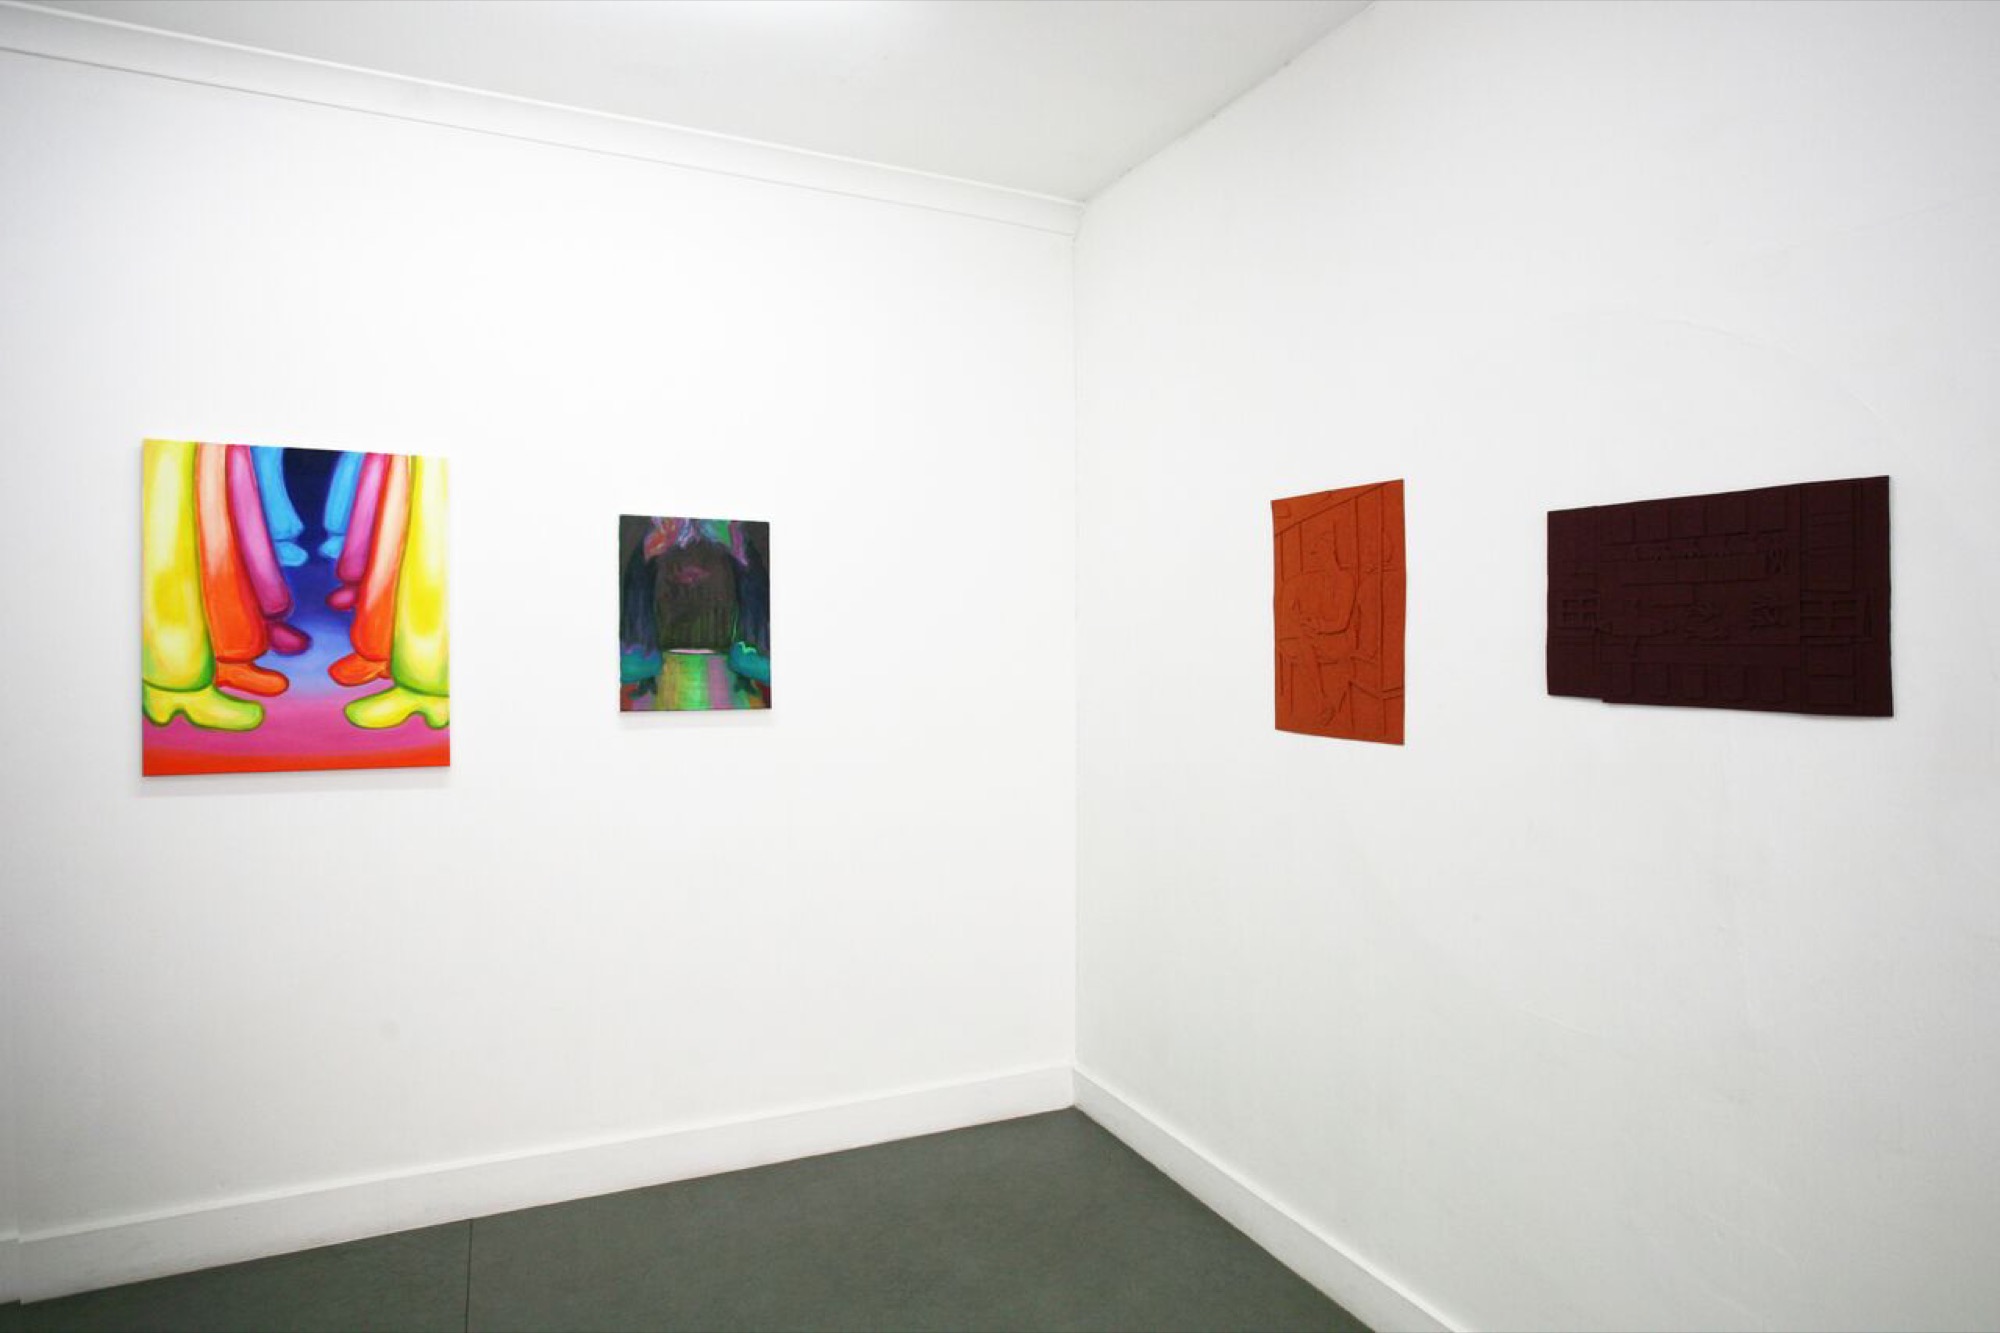 Installation view, Neon Parc City. (LEFT TO RIGHT): Nick Mullaly, <em>Push me</em>, 2018, oil on linen; Nick Mullaly, <em>Lil Boots</em>, 2018, oil on linen; Spencer Lai, <em>burnt sienna (maniac on the subway trolley) (after Klossowski)</em>, 2018/1978, Synthetic felt, adhesive; Spencer Lai, <em>mauve (seated figures within institution, sometimes they share meals together)</em>, 2018/c1890, synthetic felt, adhesive.